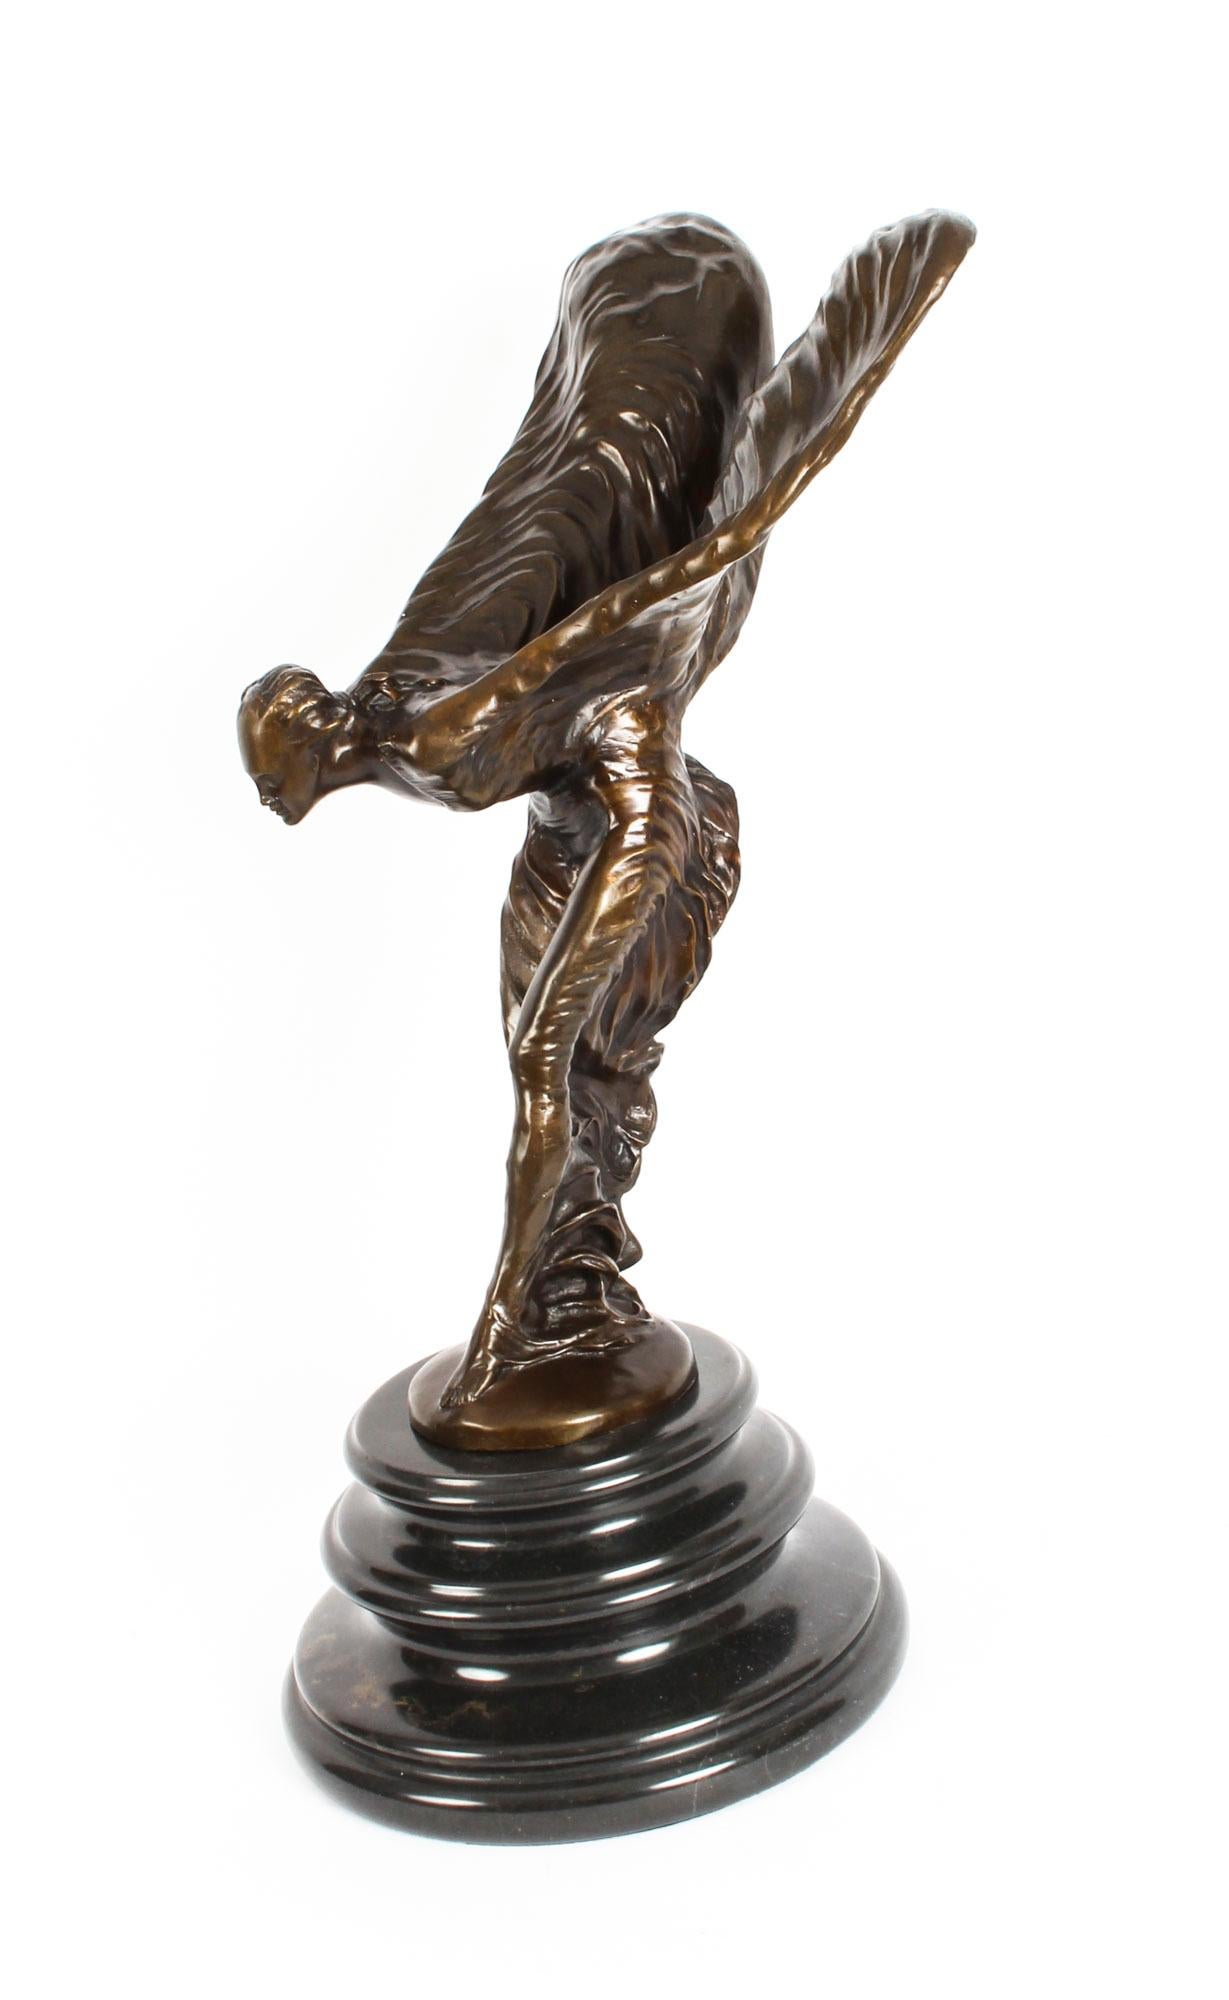 A monumental brown patinated bronze Rolls Royce sculpture of The Spirit of Ecstasy, designed by Charles Robinson Sykes, late 20th century in date.

The sculpture is in the form of a woman leaning forwards with her arms outstretched behind and